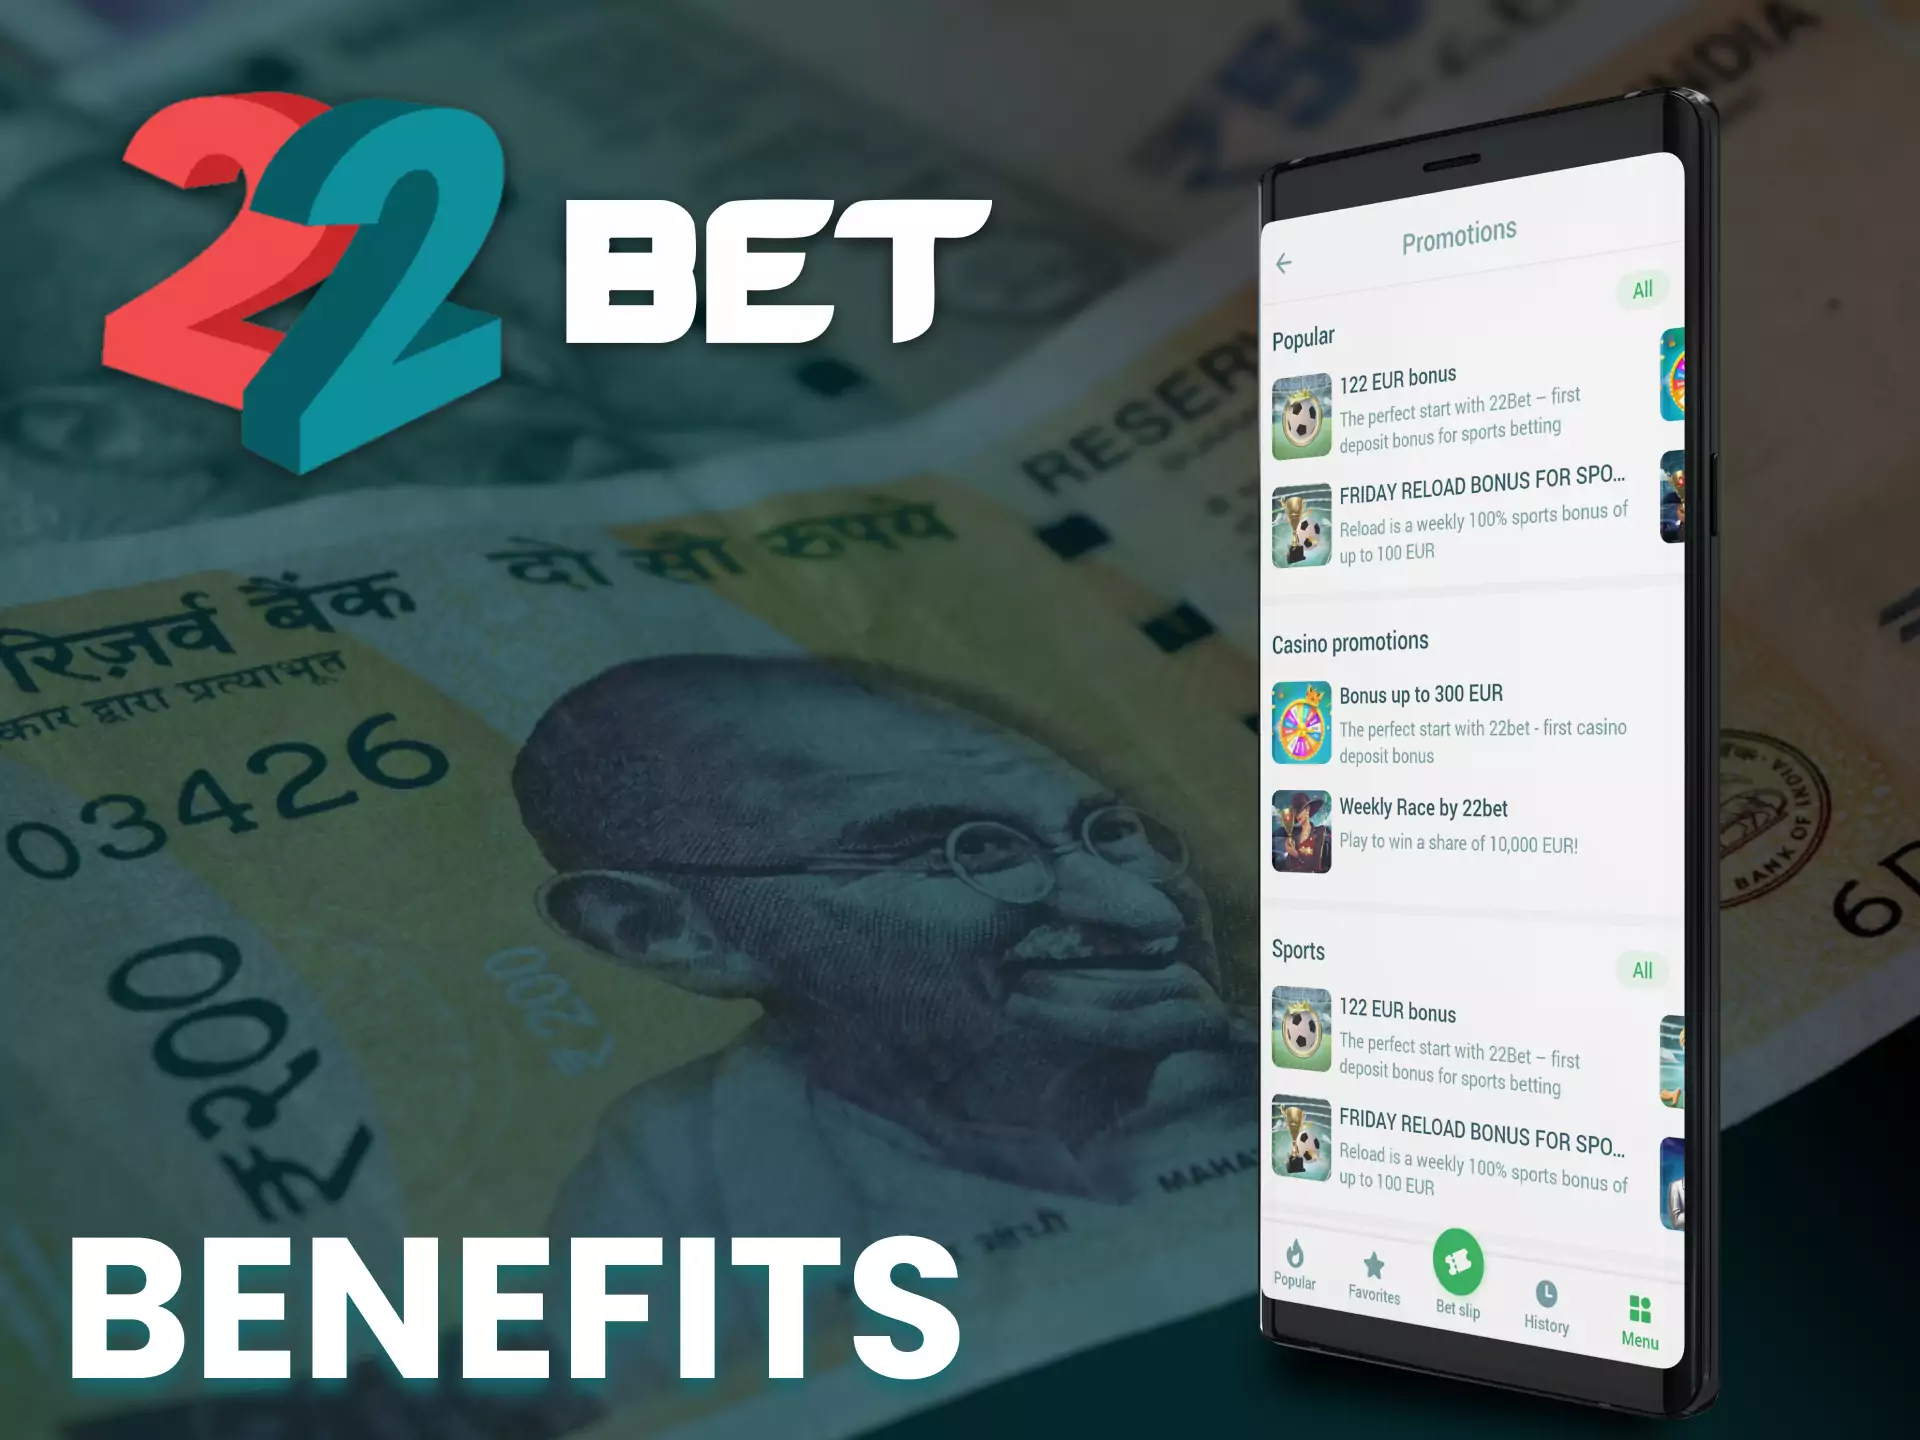 22bet app offers its players many benefits.